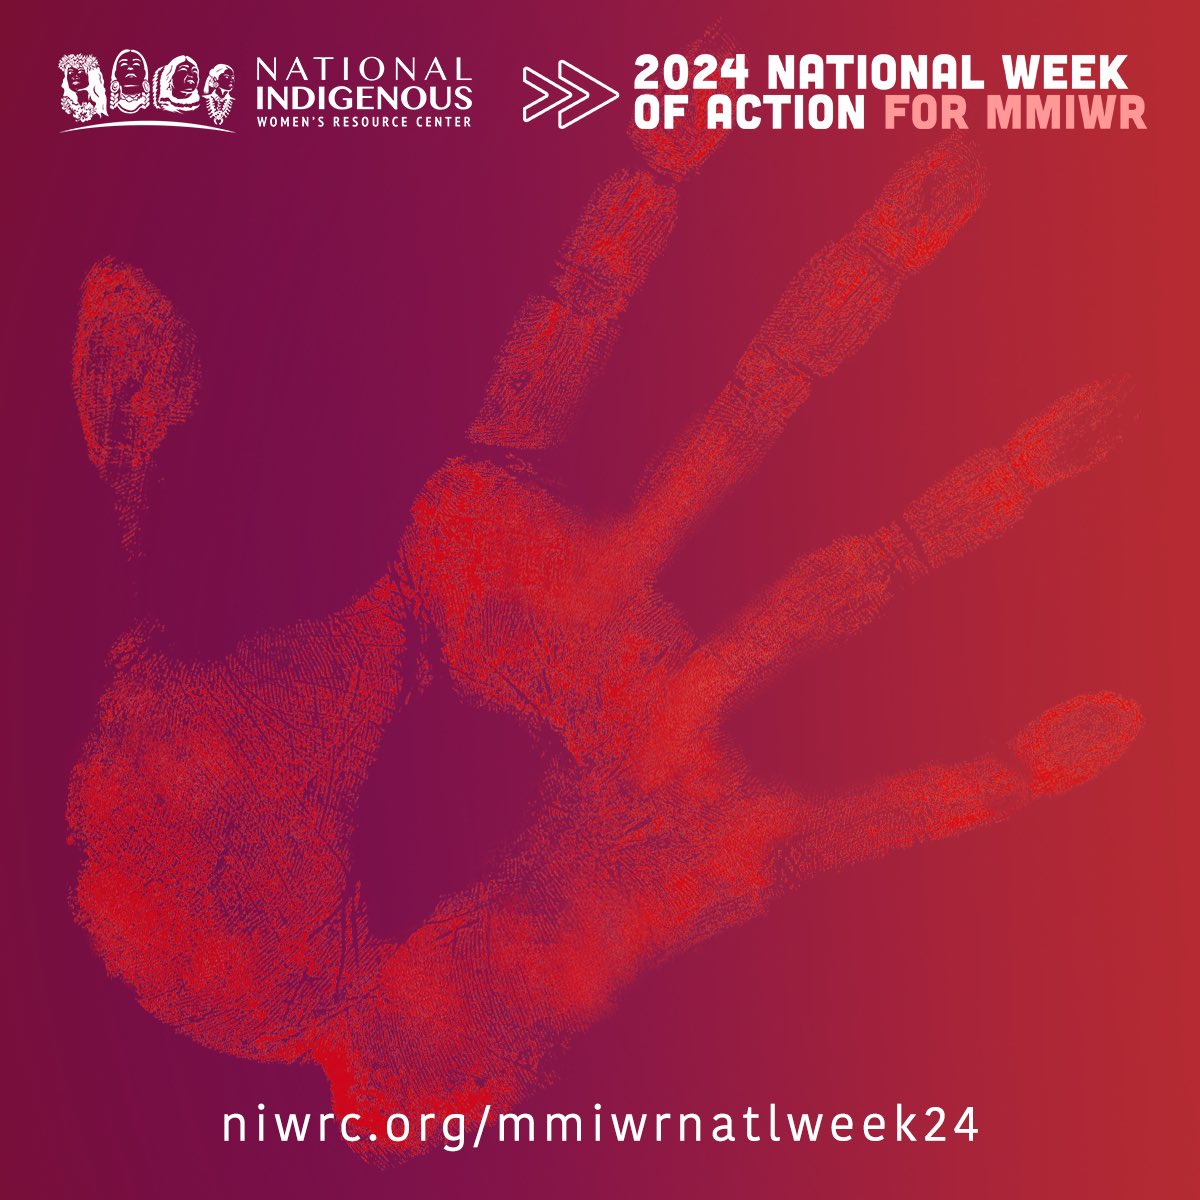 Today is the beginning for the MMIWP National Week of Action. The National Indigenous Women’s Resource Center hosts a variety of events & provides online resources. 

Today at 11 am PST/12 MST – a Traditional Opening to start the week.
#MMIWAactionnow #NoMoreStolenSisters #MMIW